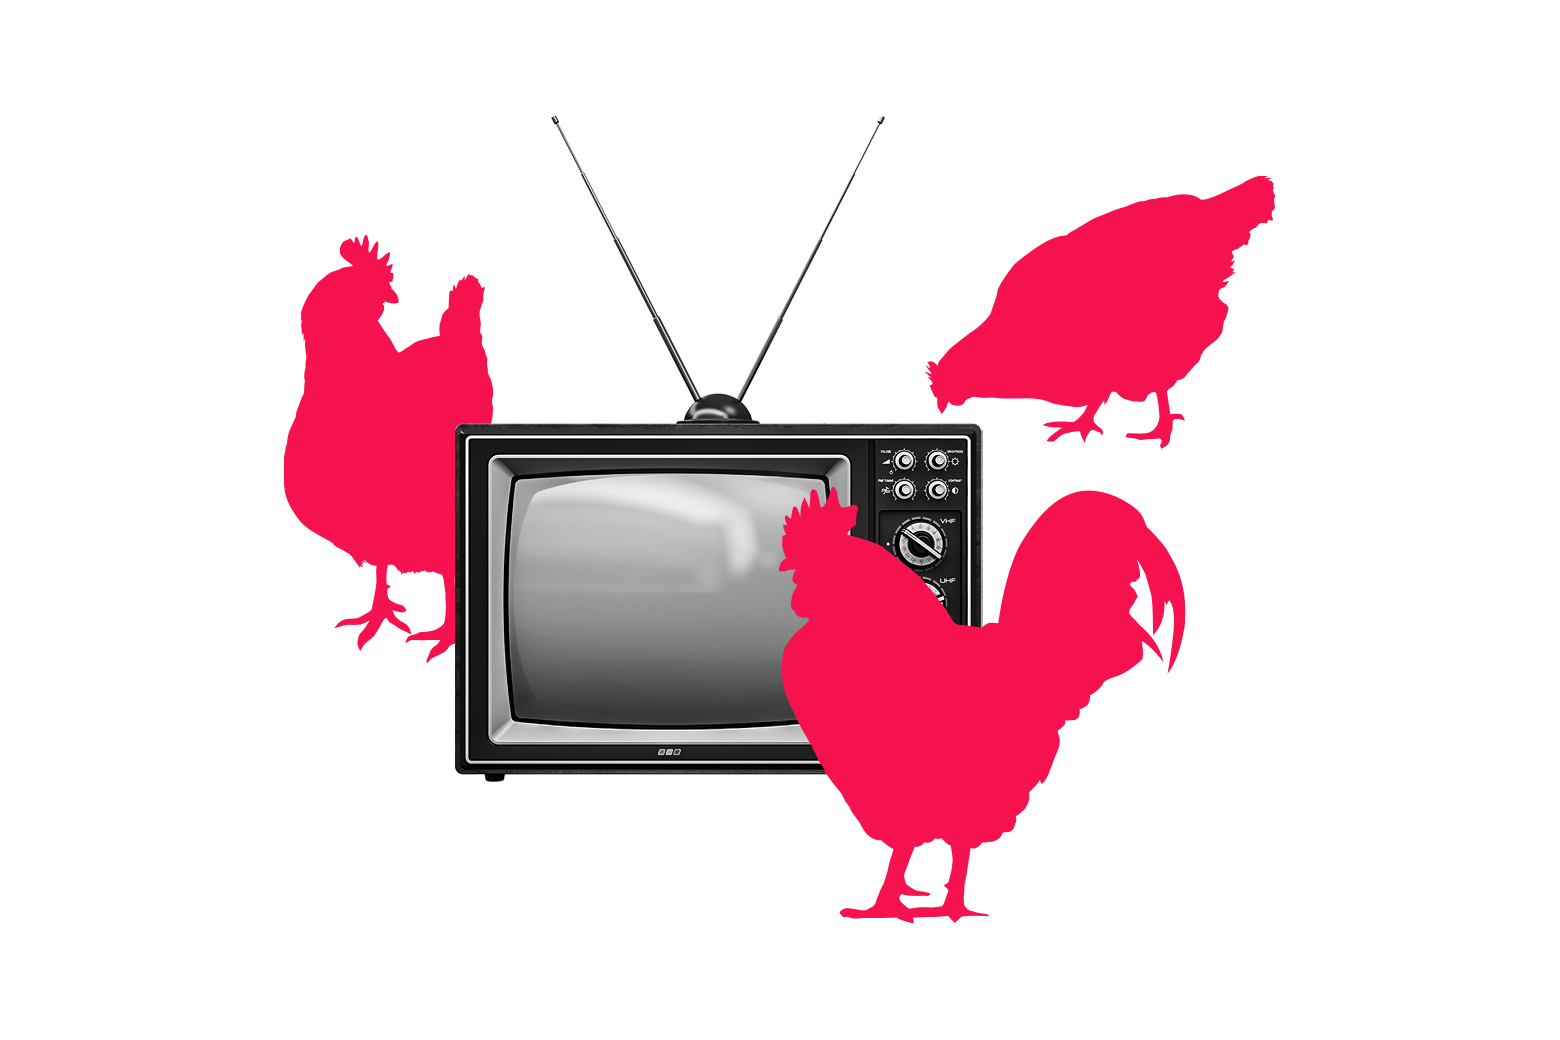 Retro TV set surrounded by chickens.